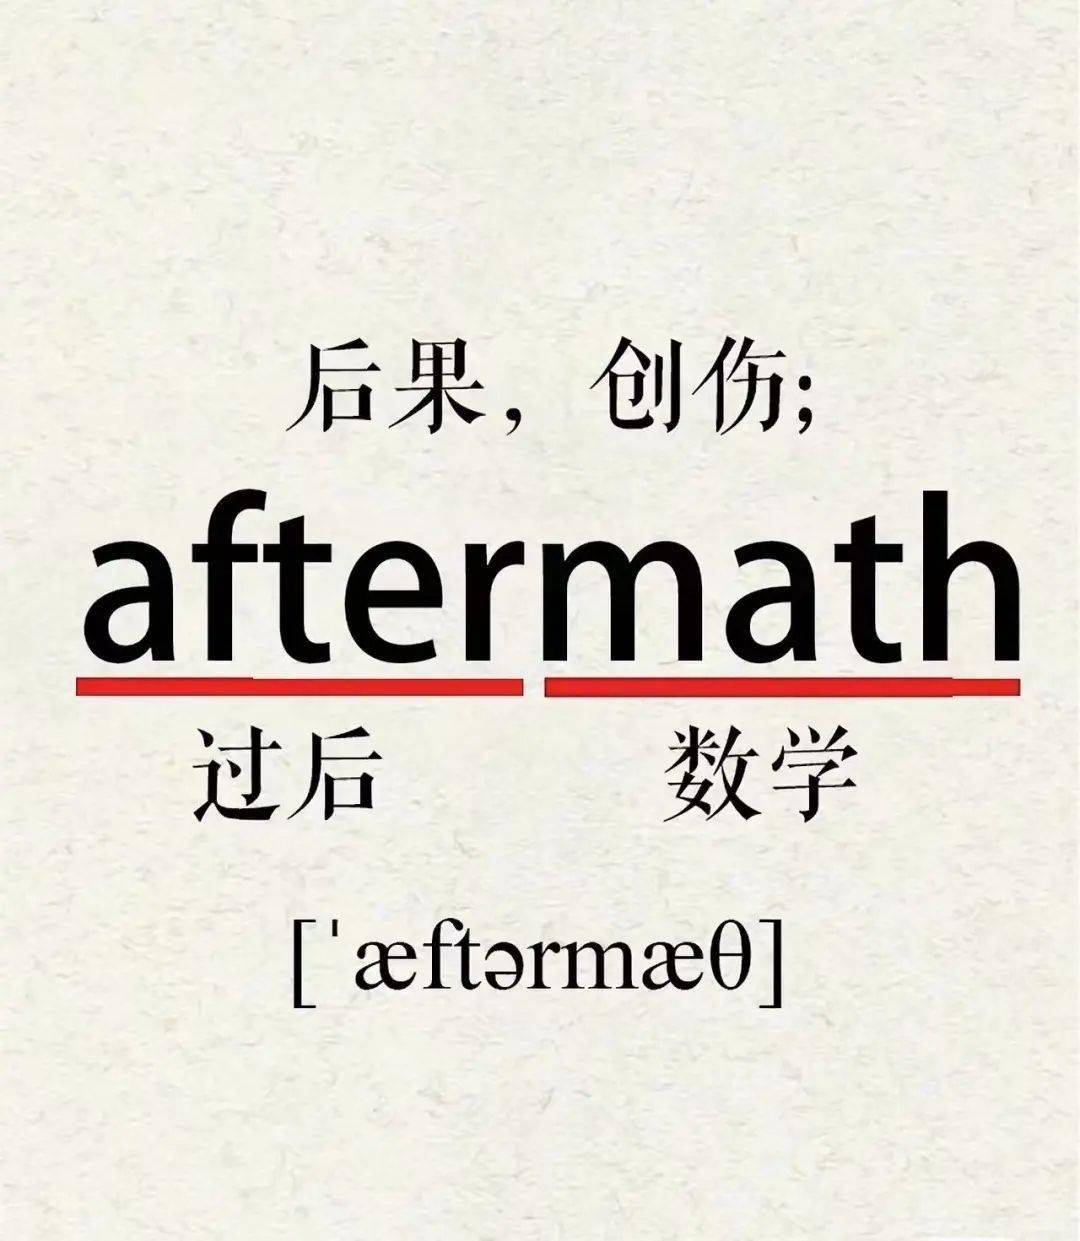 aftermath梗图图片